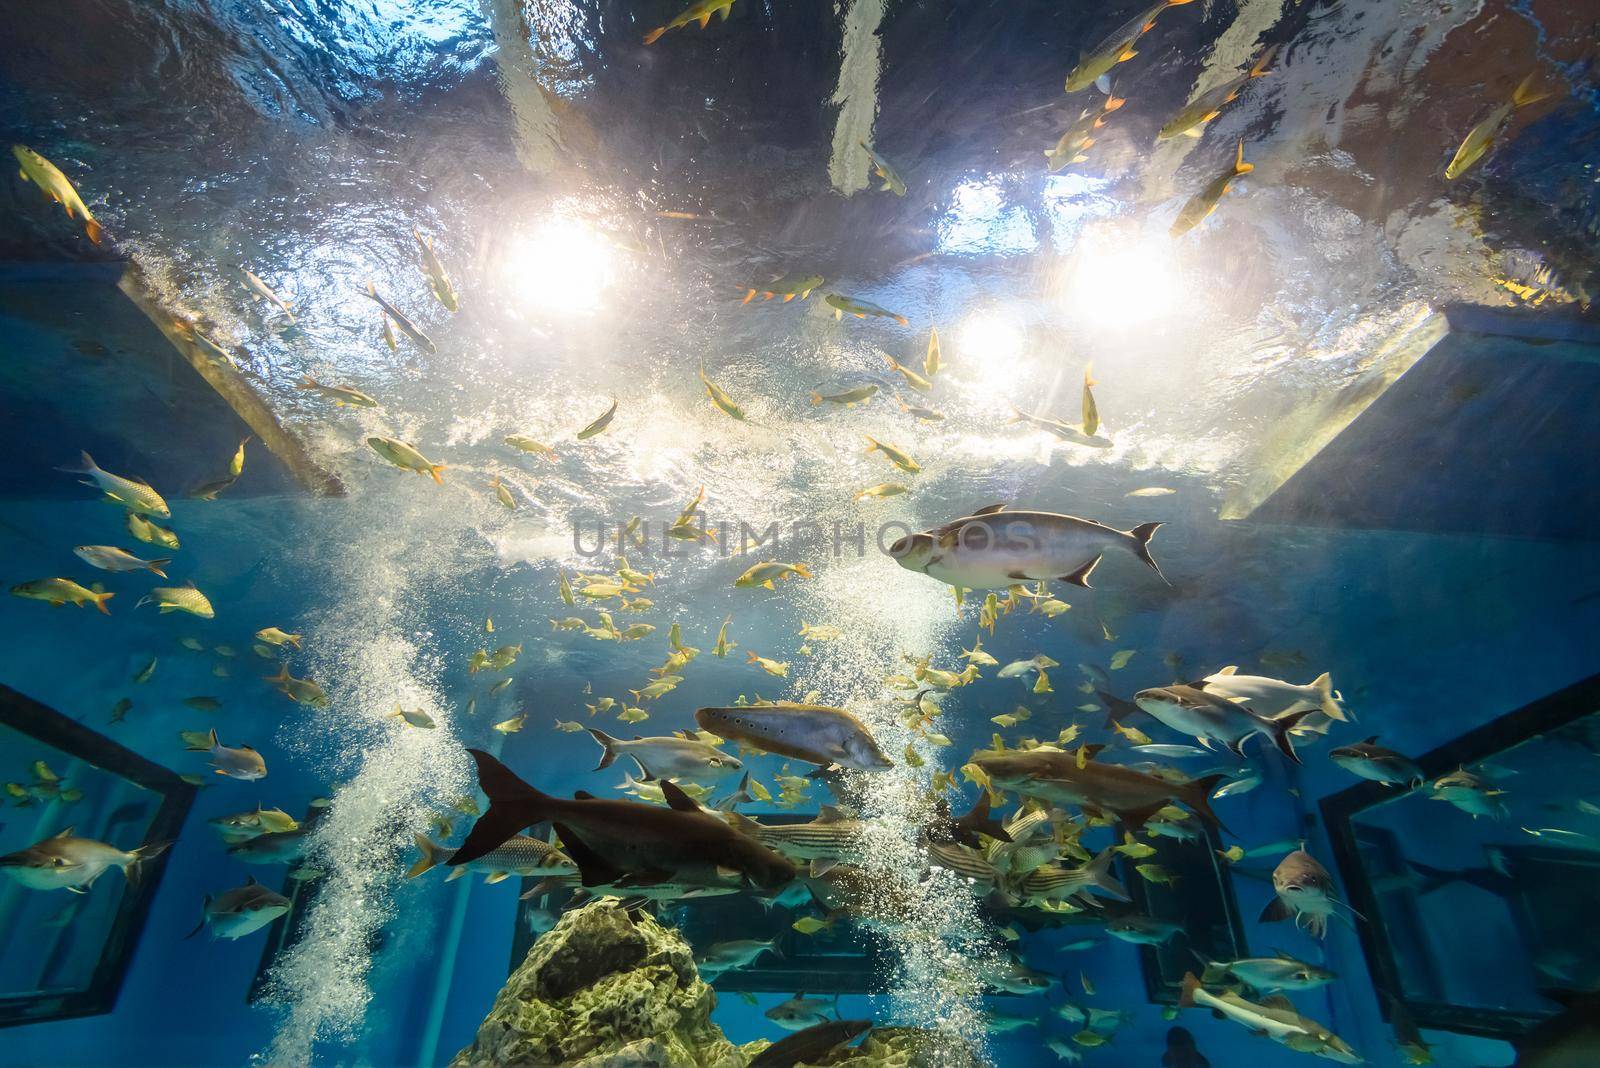 Beautiful nature blue underwater world inside a large aquarium for many species of freshwater fish in Thailand